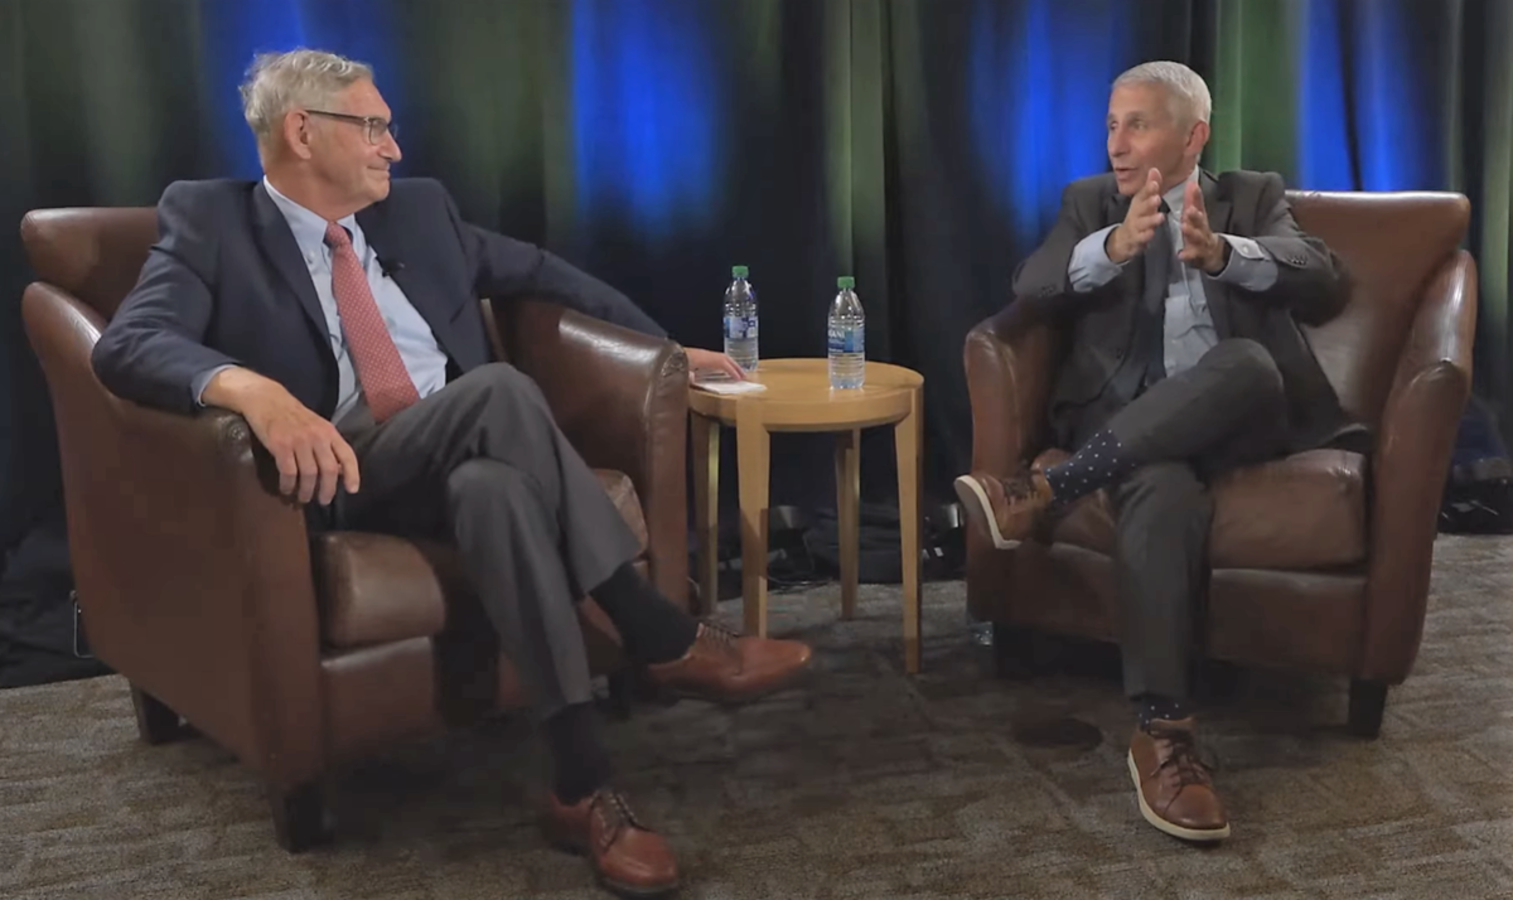 Drs. Larry Corey and Anthony Fauci